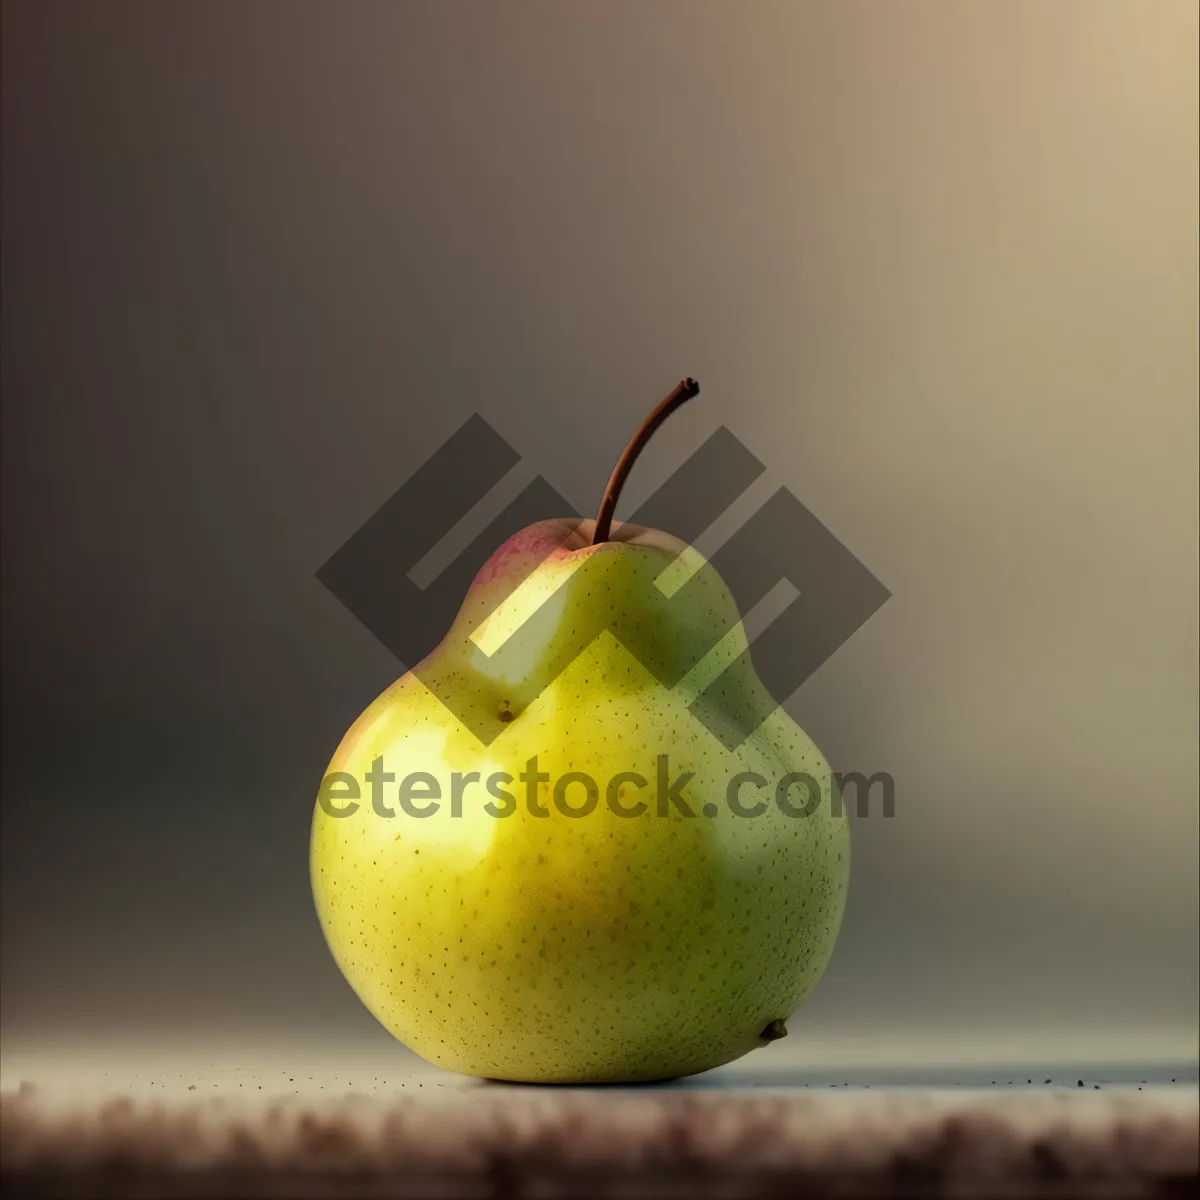 Picture of Juicy and Fresh Pear - Deliciously Nutritious and Refreshing